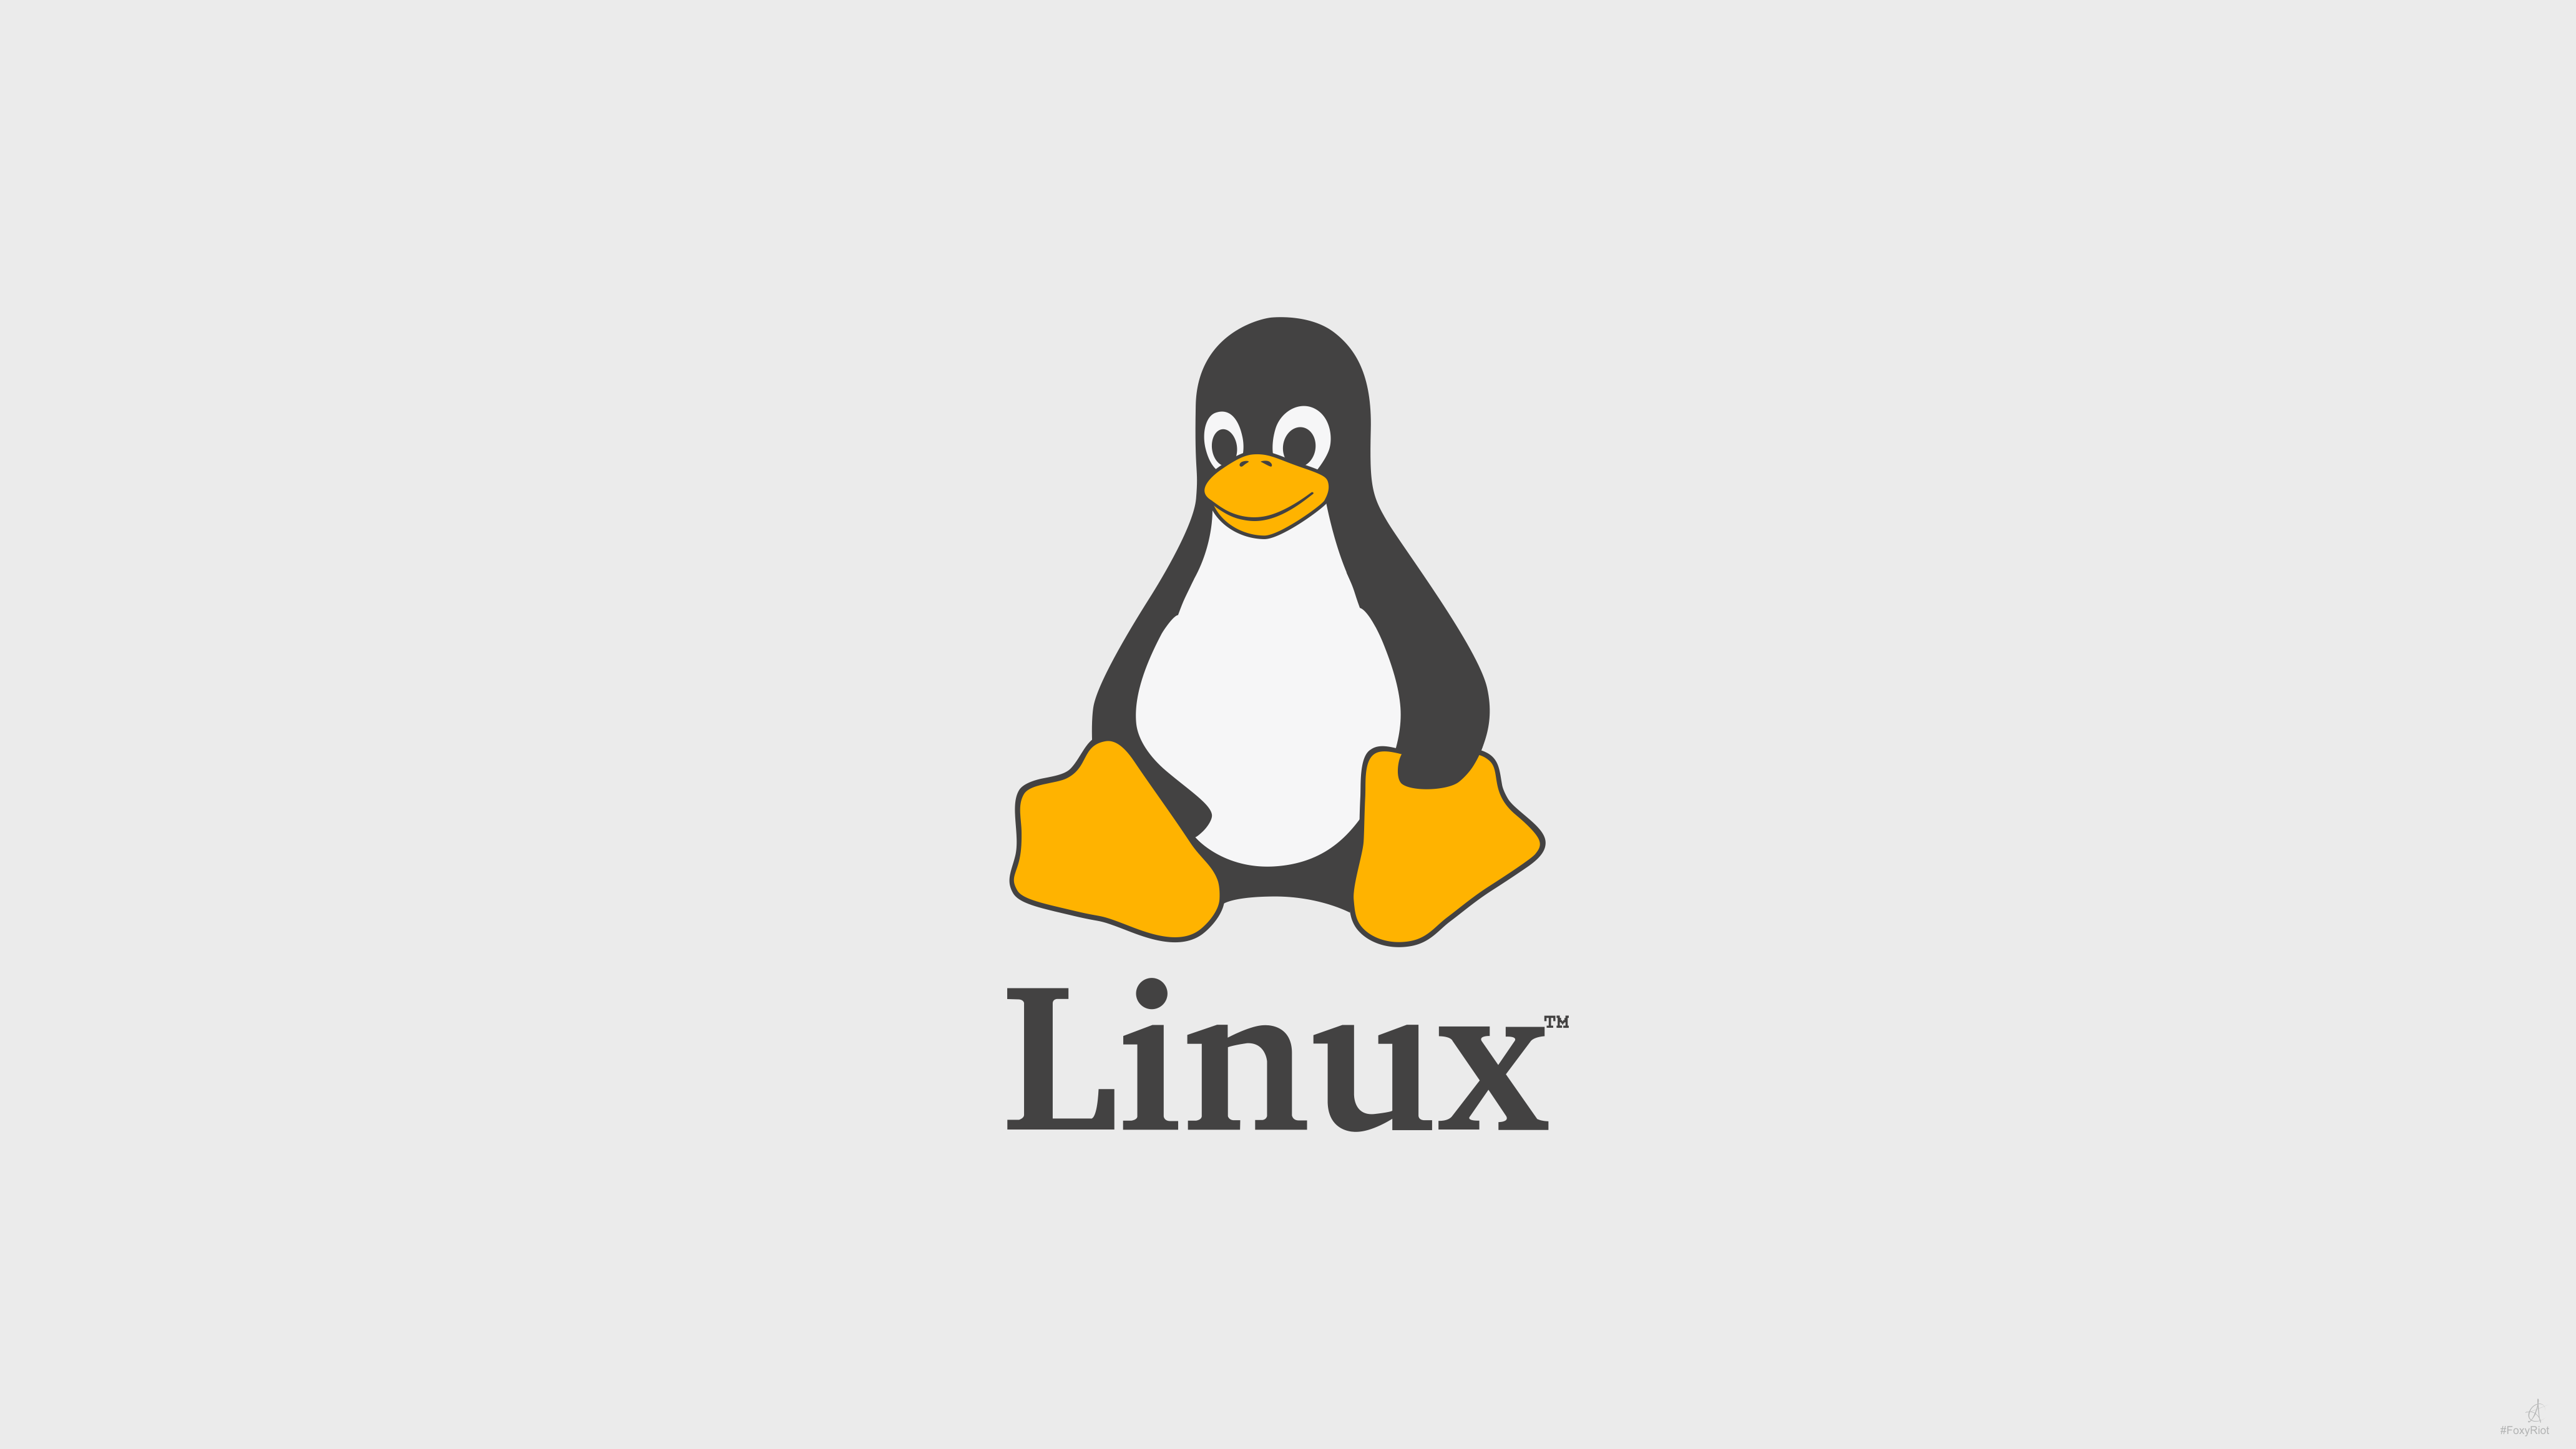 General 4128x2322 Tux Linux FoxyRiot operating system